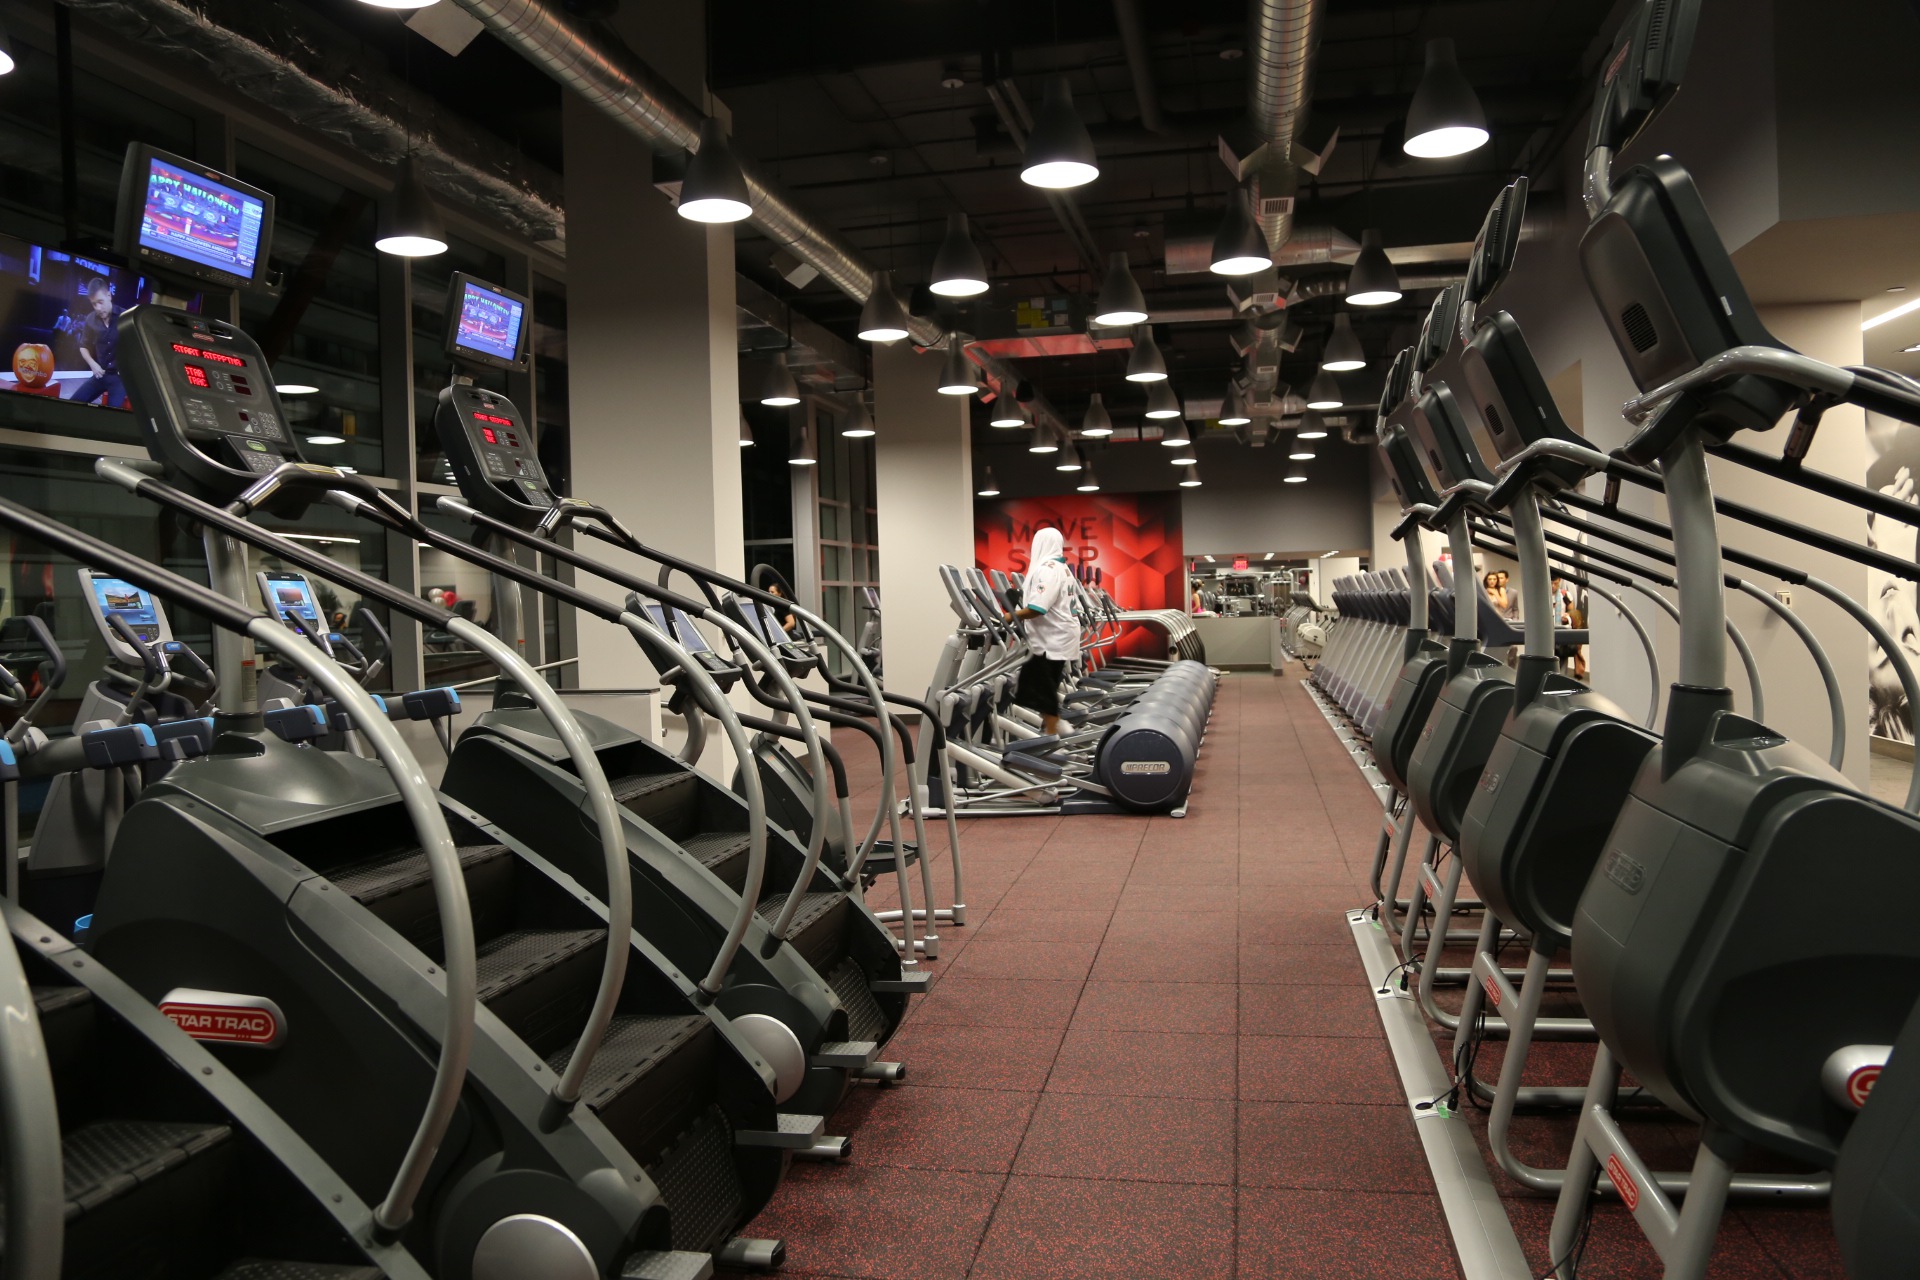 Hard Candy Fitness in Toronto is a large 42,000 square feet with rows and rows of the latest equipment